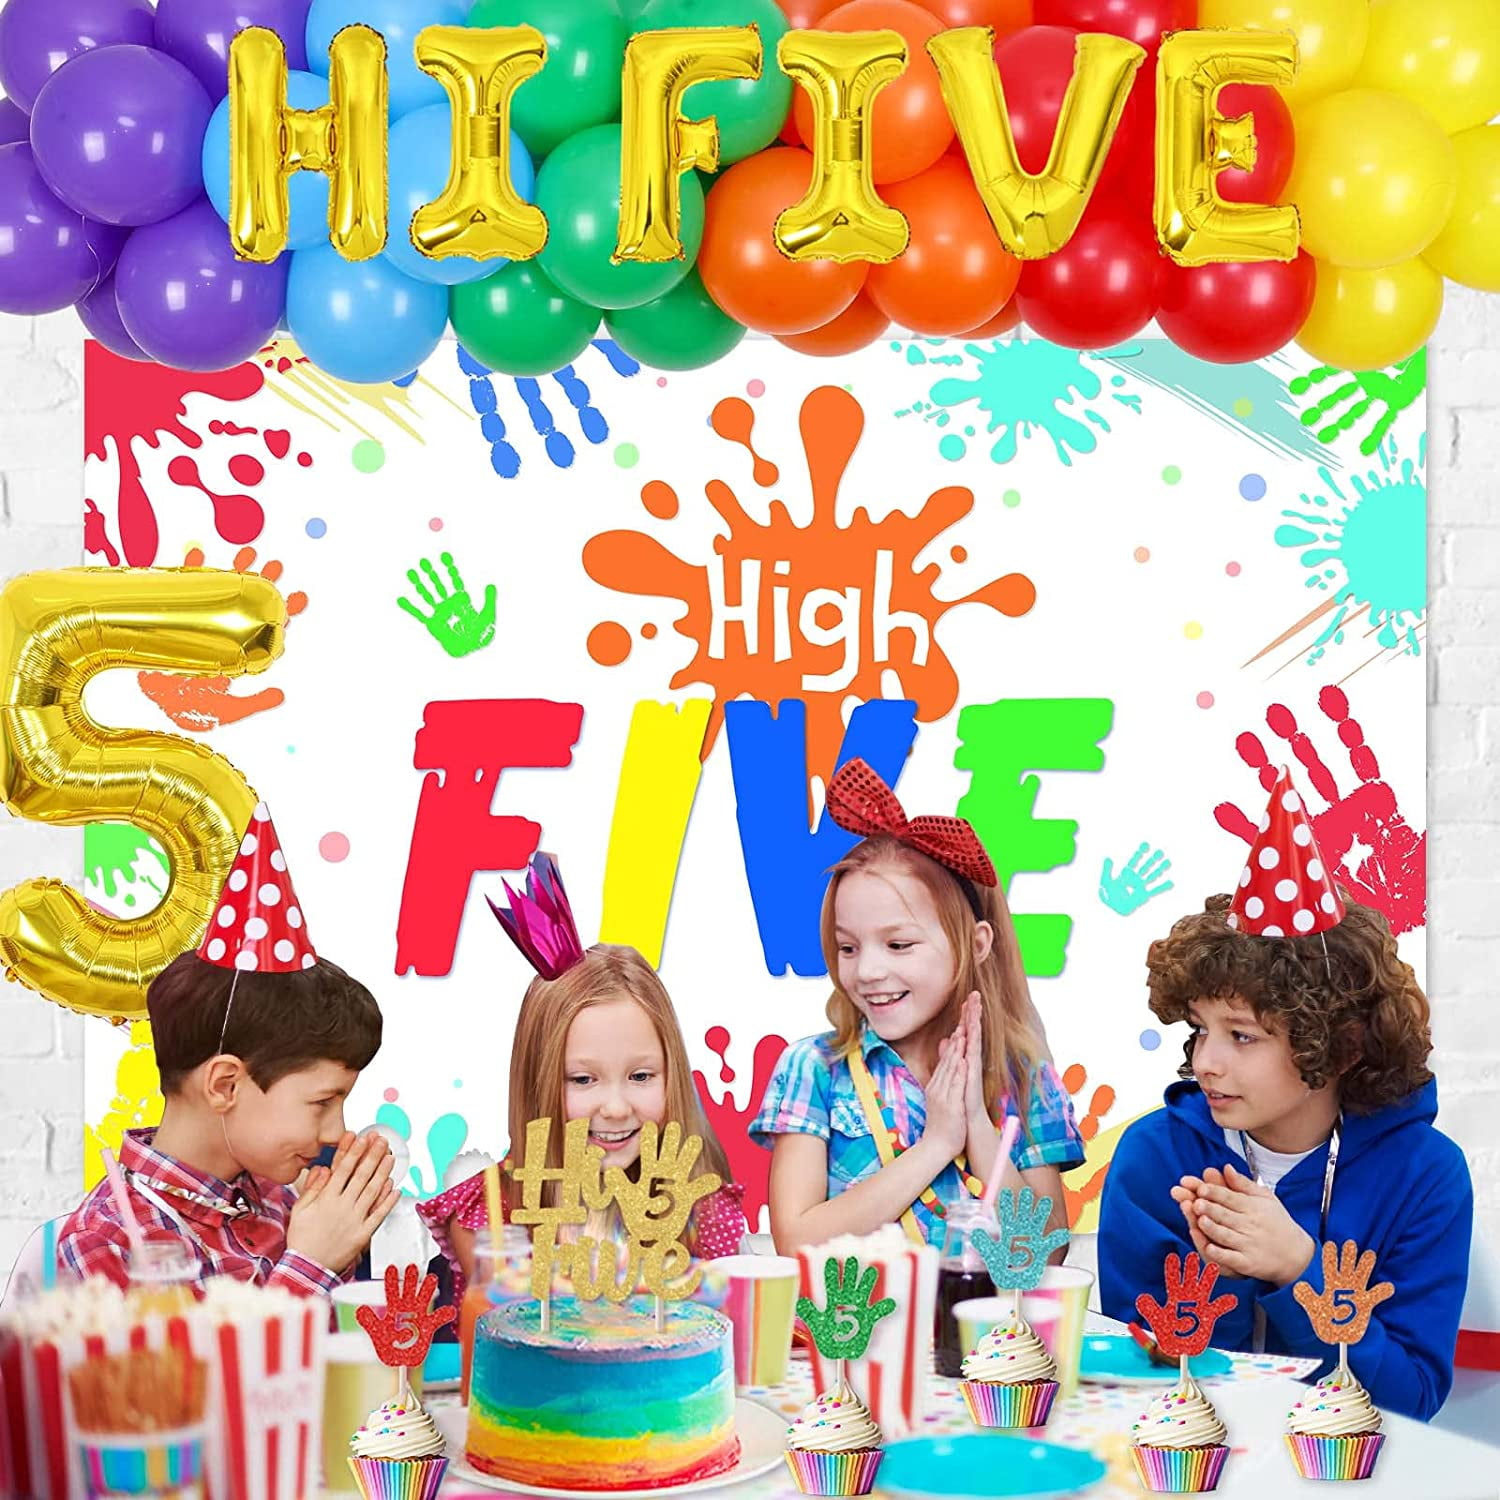 Hi Five Birthday Party Decorations, High Five 5th Birthday Party Backdrop Banner Hand Print Photography Background Orange Purple Green Balloons Gold Glitter Cake Topper for 5 Years Old Boys Girls - Walmart.com